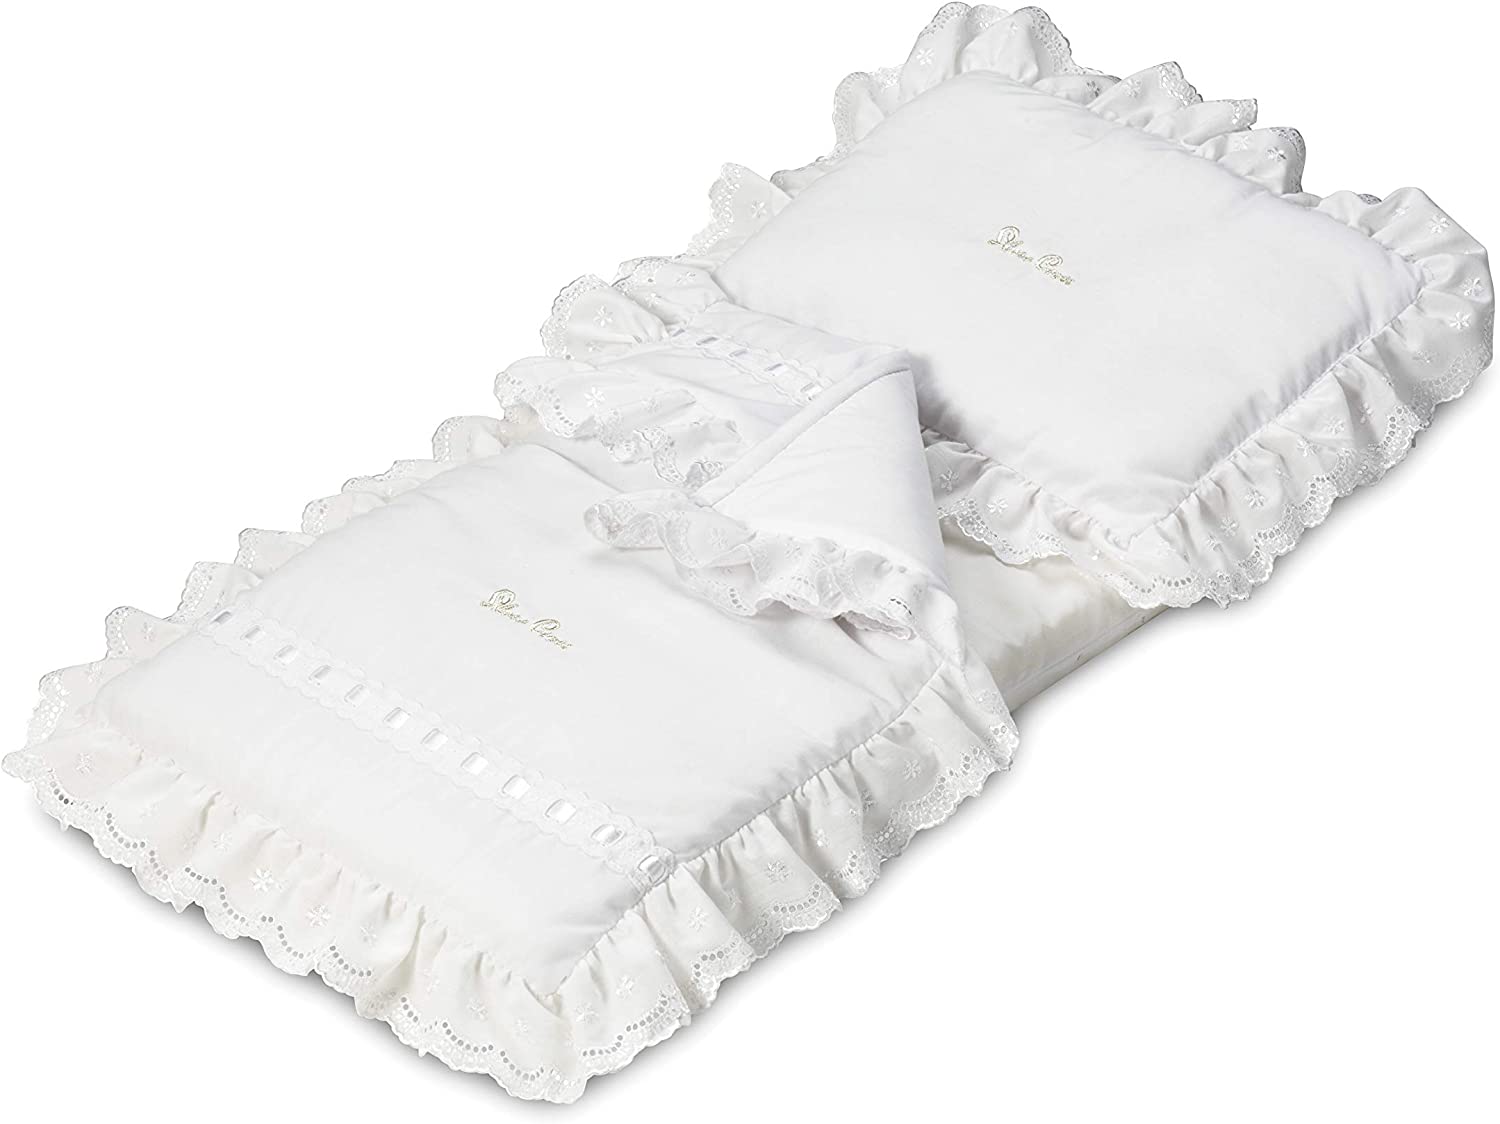 Pram Canopy and Quilt Set  to fit Silver Cross pram in white  Broderie Anglaise 